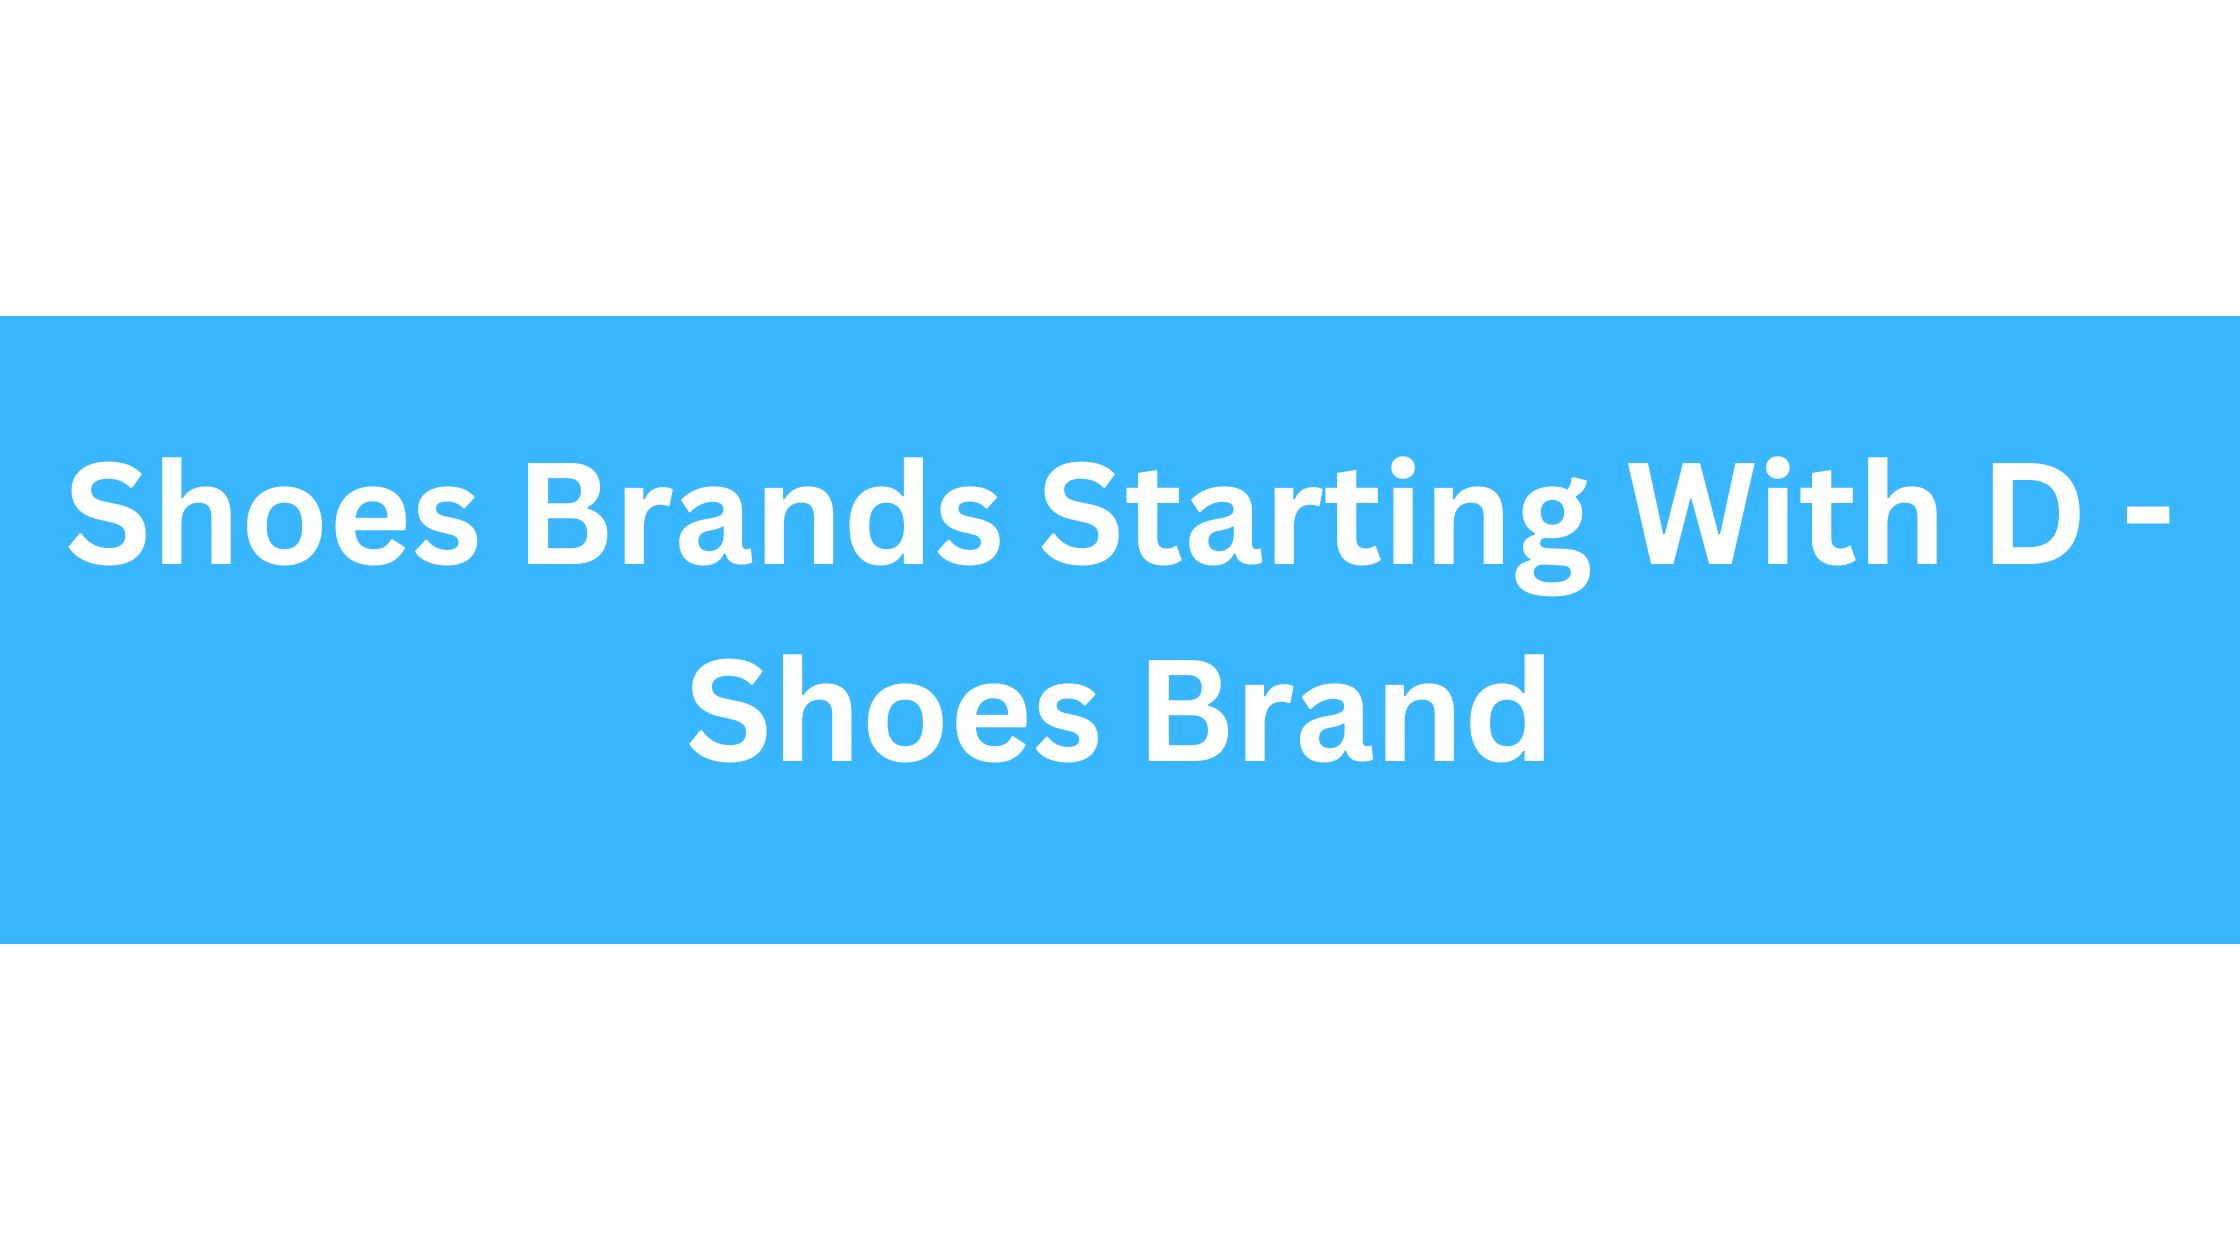 Shoes Brands Starting With D